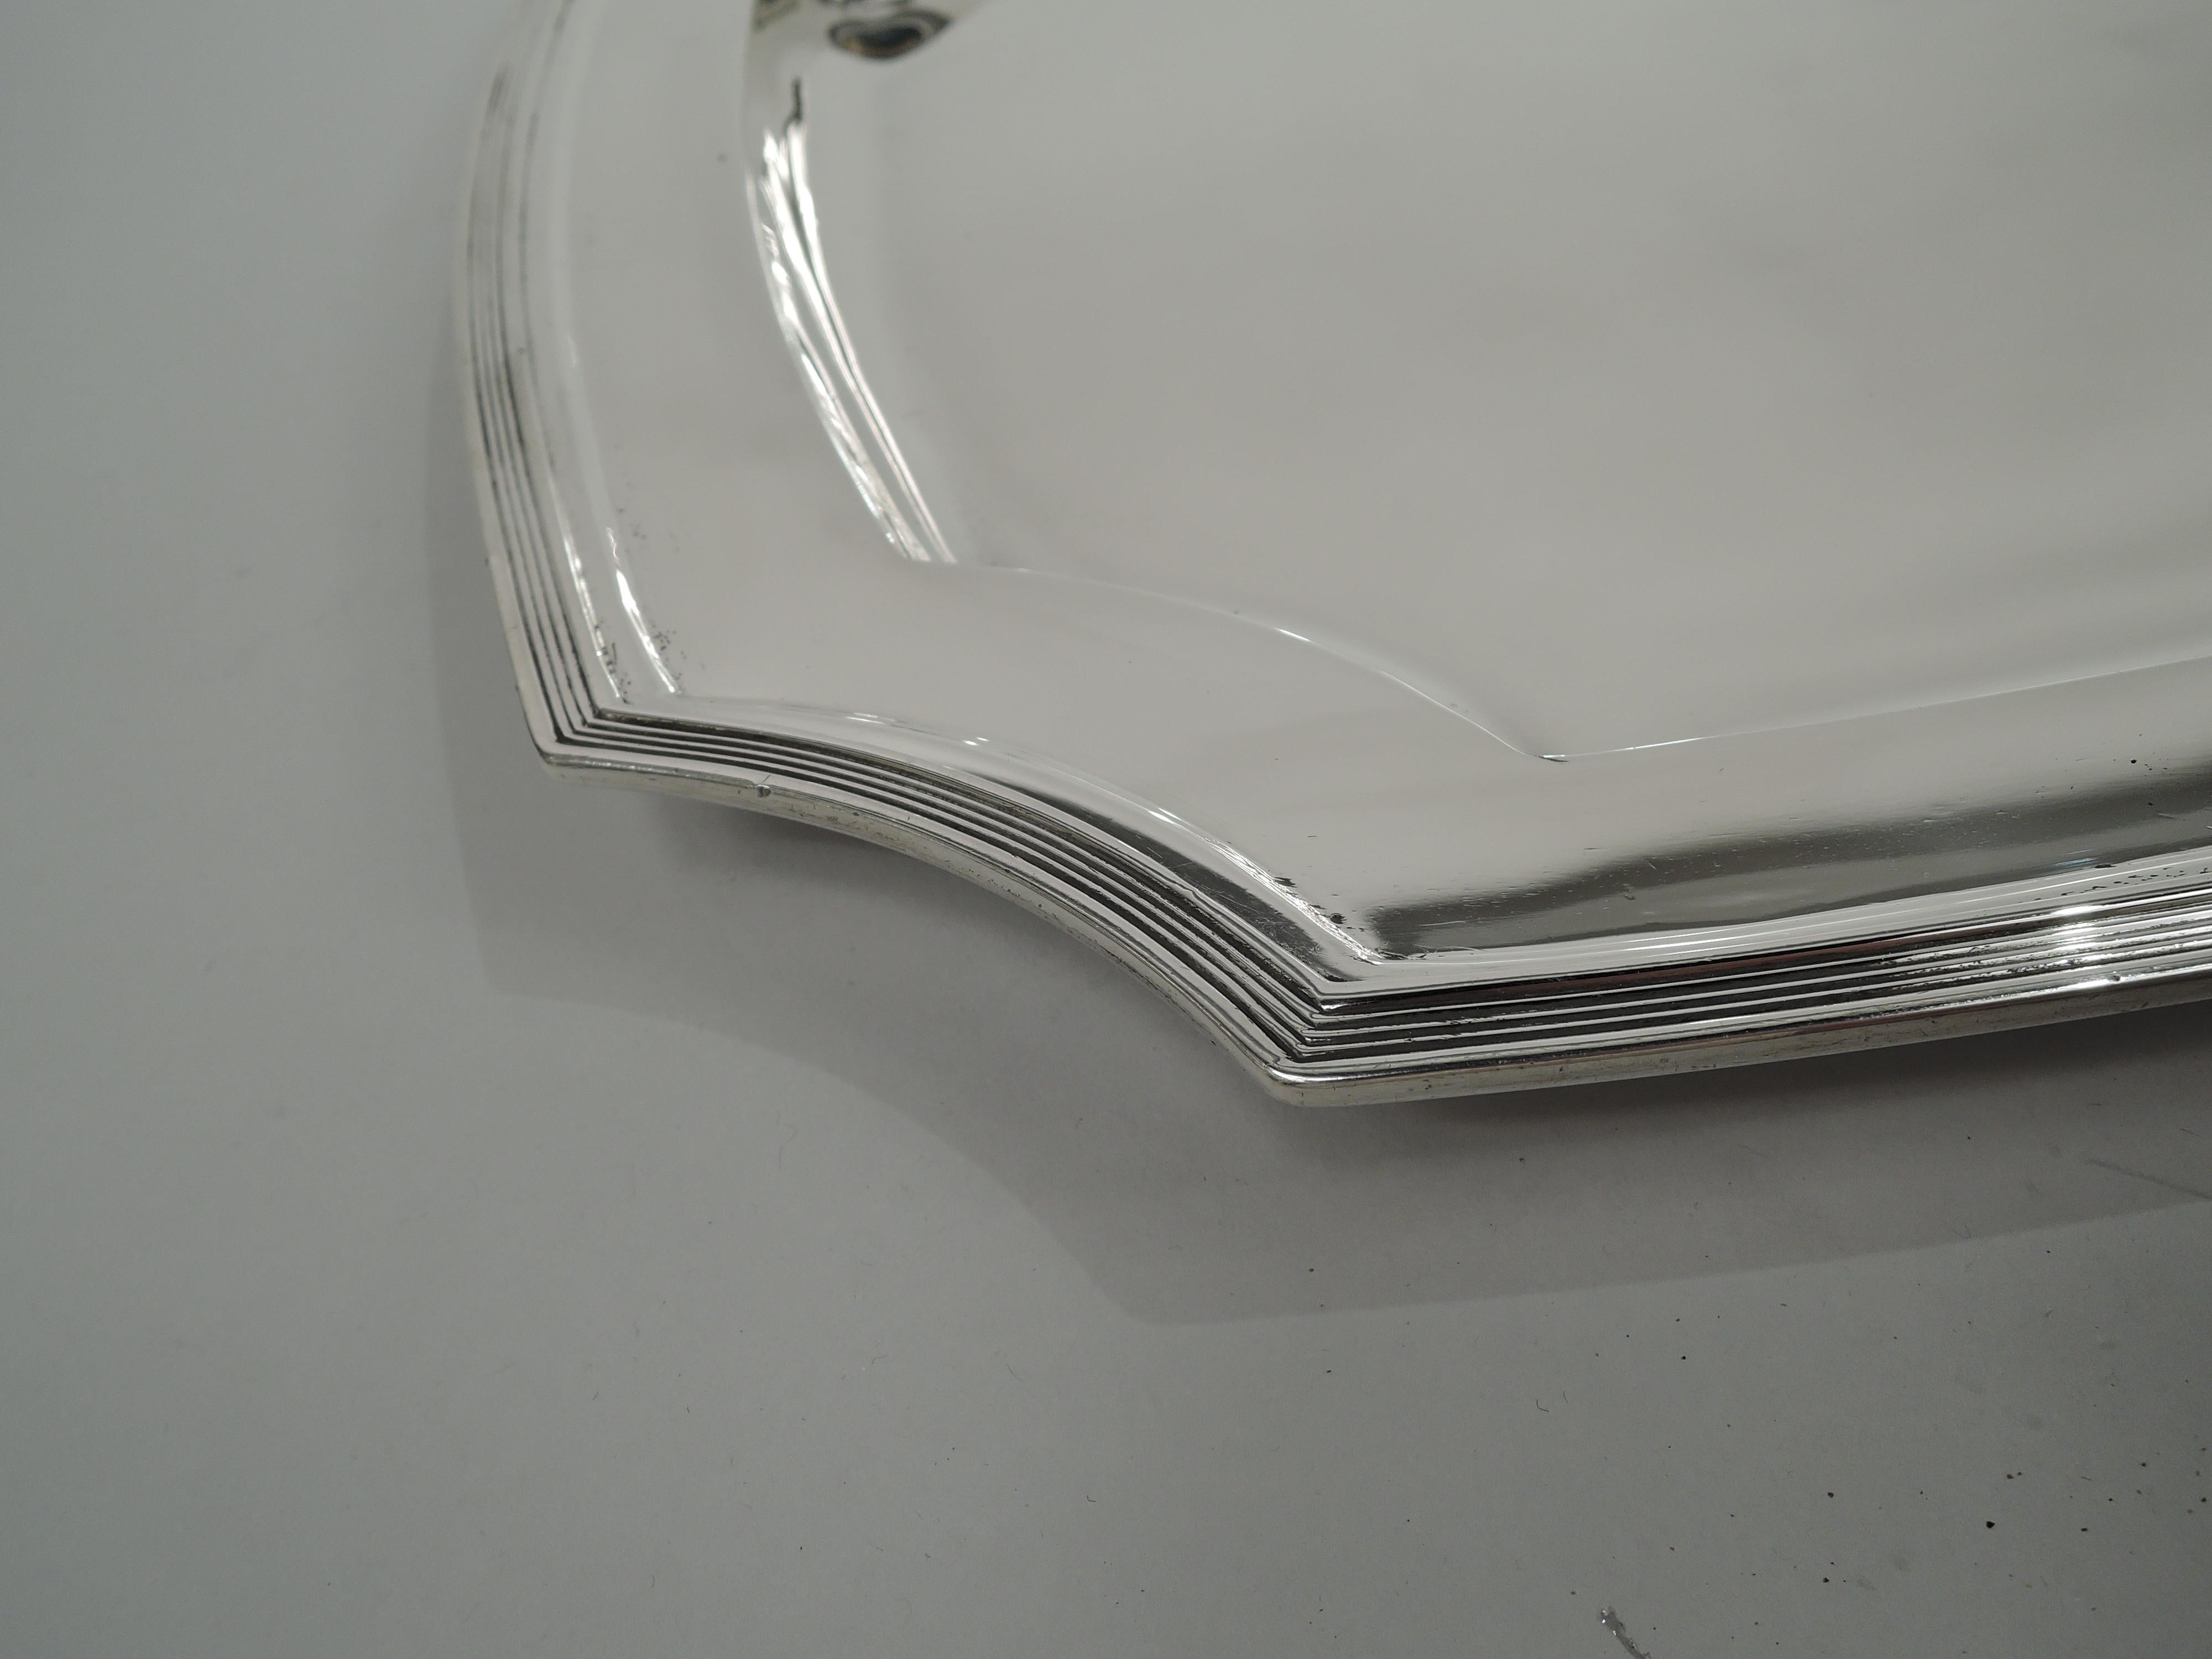 Hampton sterling silver serving tray. Made by Tiffany & Co. in New York, ca 1924. Rectangular with curved sides and concave corners. Deep well, wide shoulder, and reeded rim. Fully marked including maker’s stamp, pattern no. 20373 (first produced in